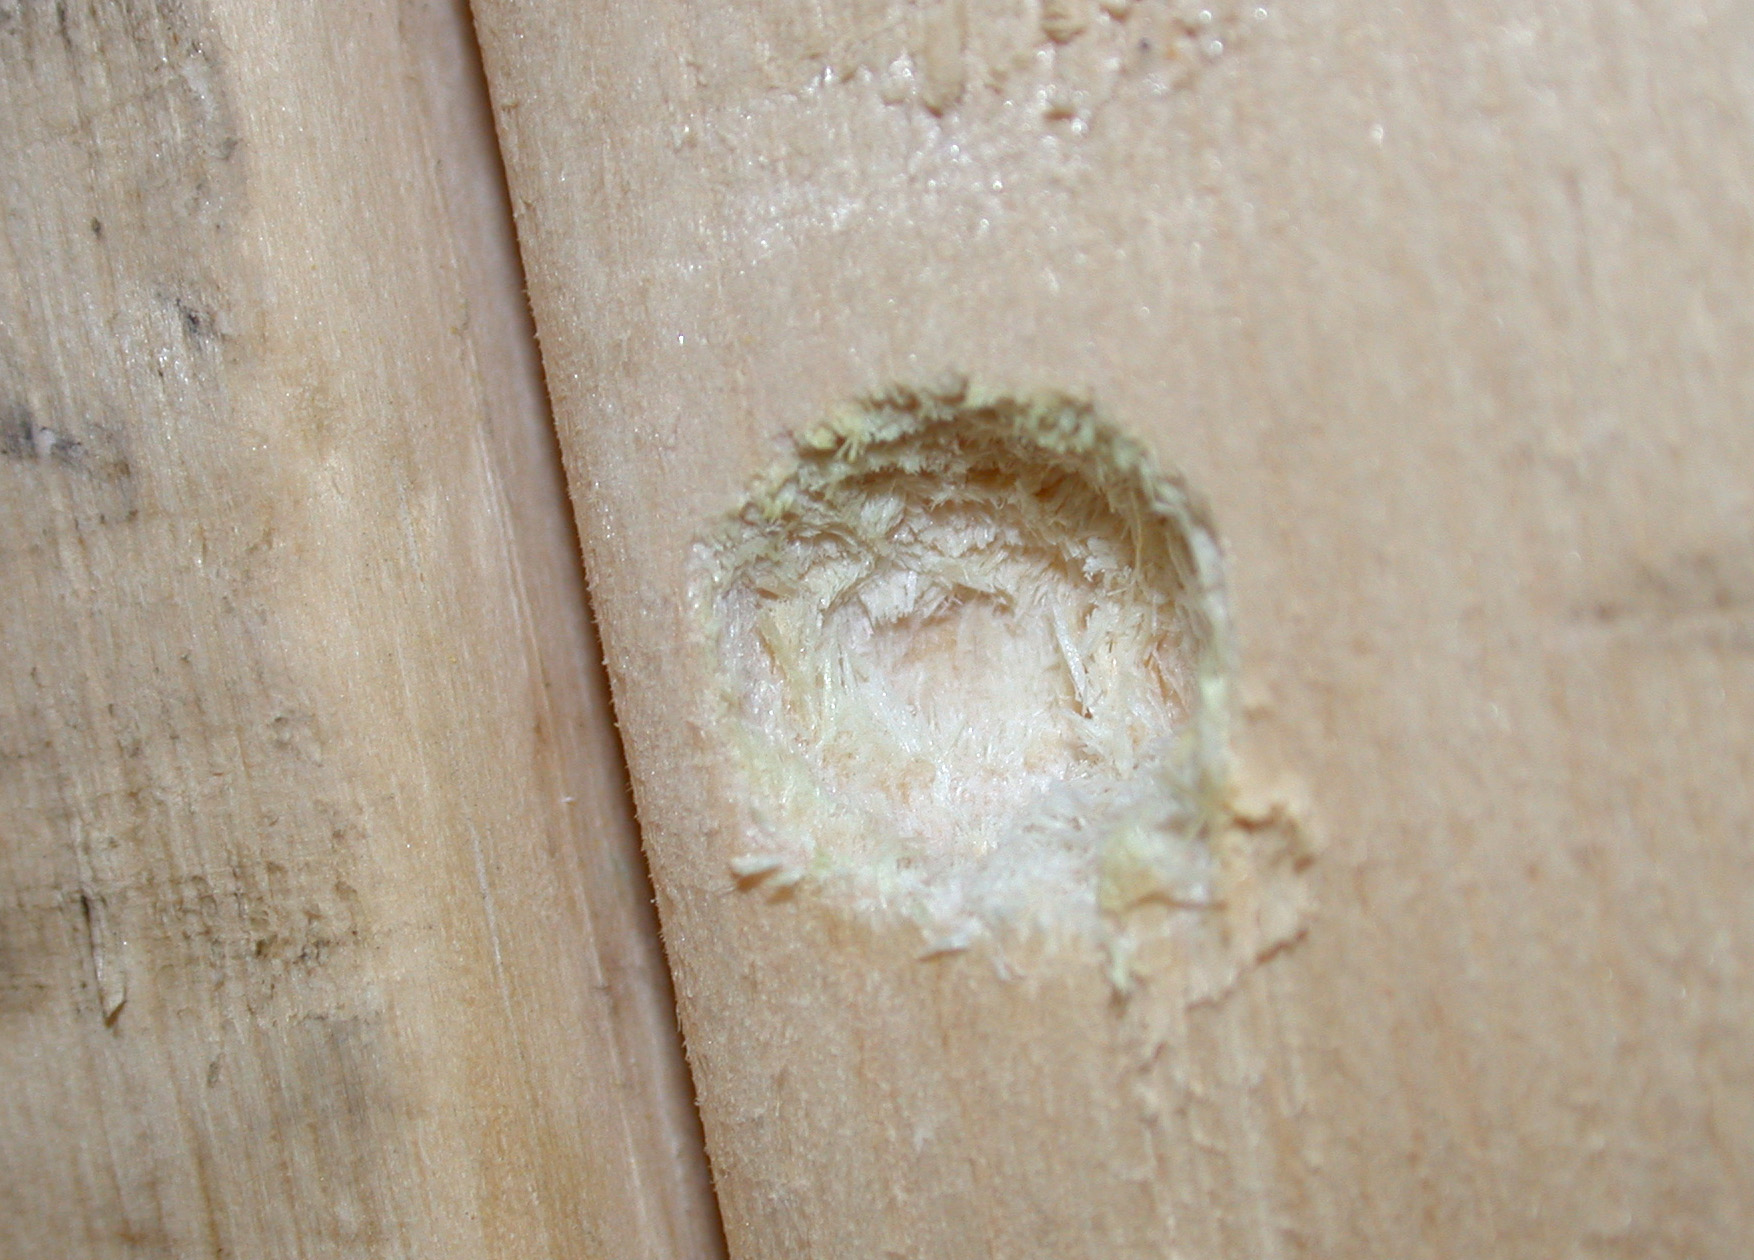 Beginning of hole that will eventually become nearly perfectly round and approximately 1/2 inch in diameter. (<em>Photo Credit: J. Obermeyer</em>).